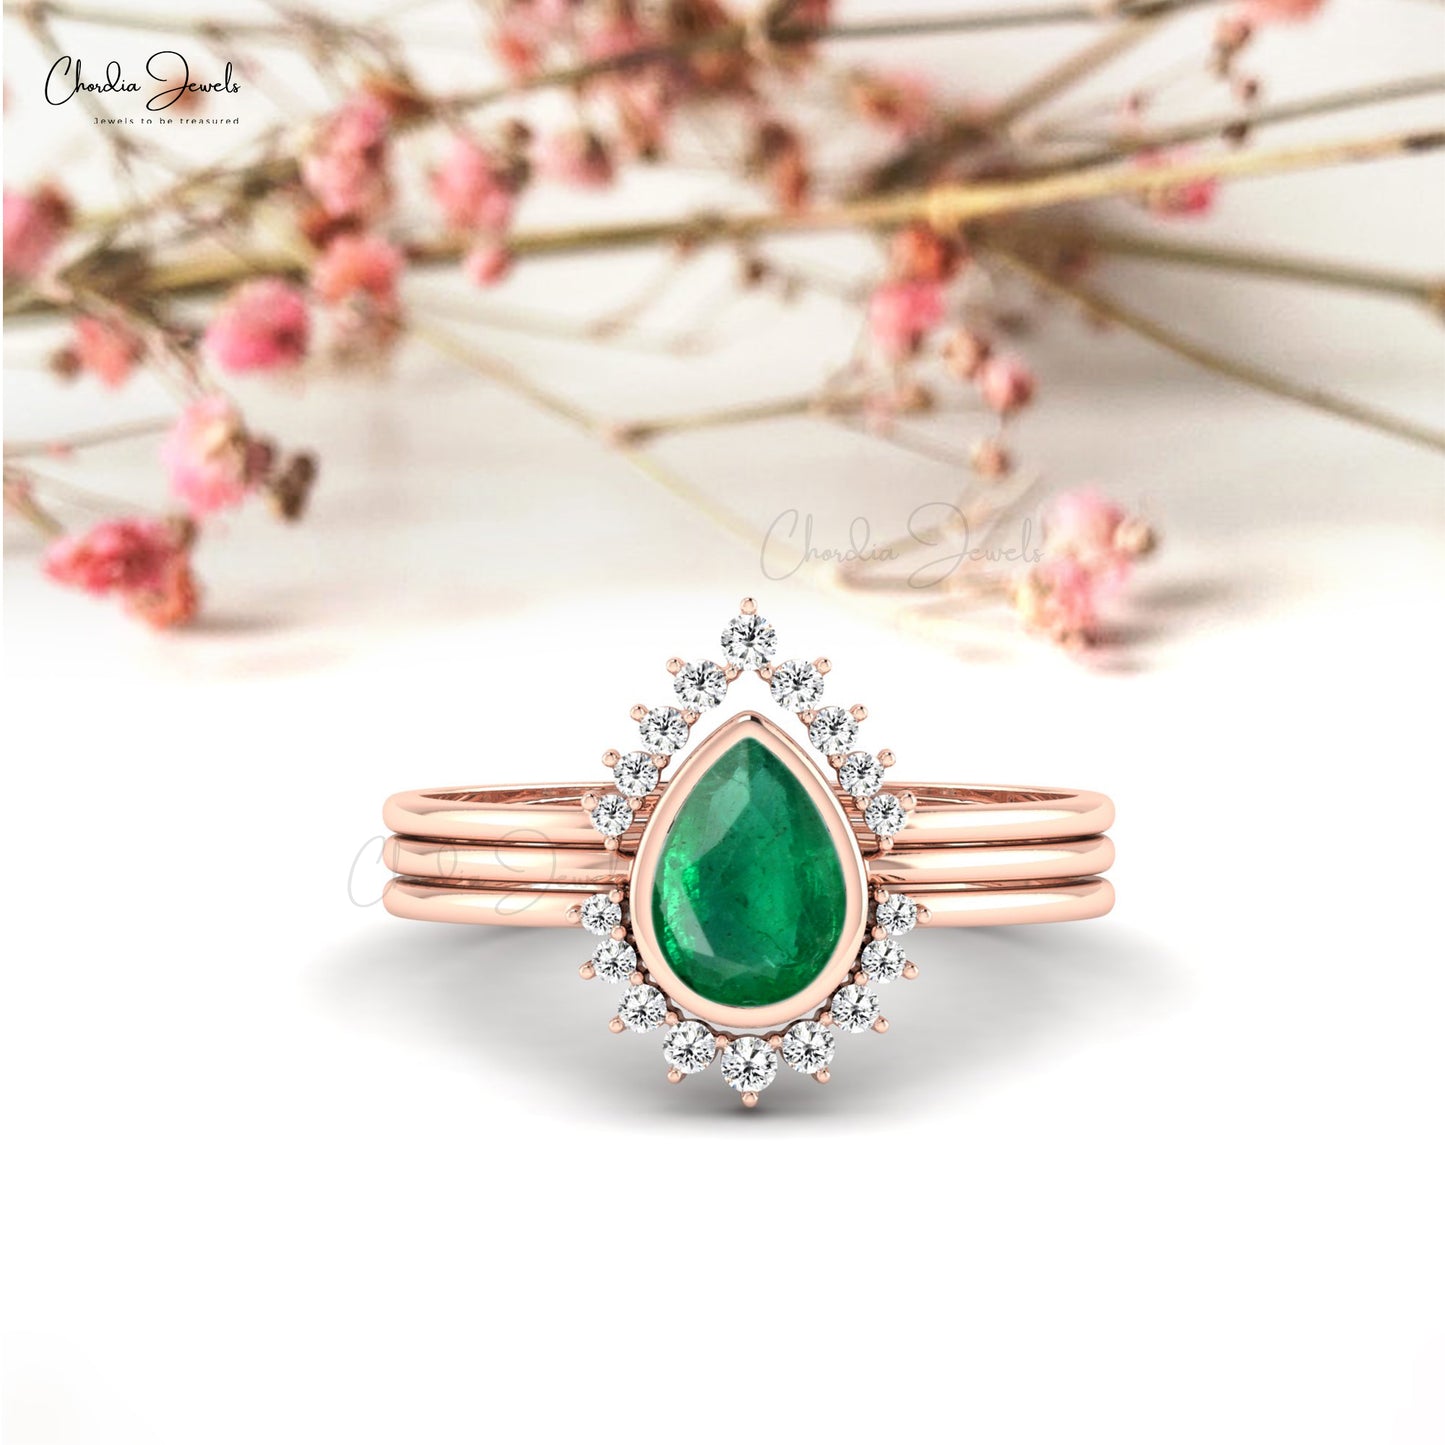 Genuine Emerald 7X5mm Pear Cut Gemstone Stackble Dainty Ring 14k Solid Gold Diamond Ring For Her